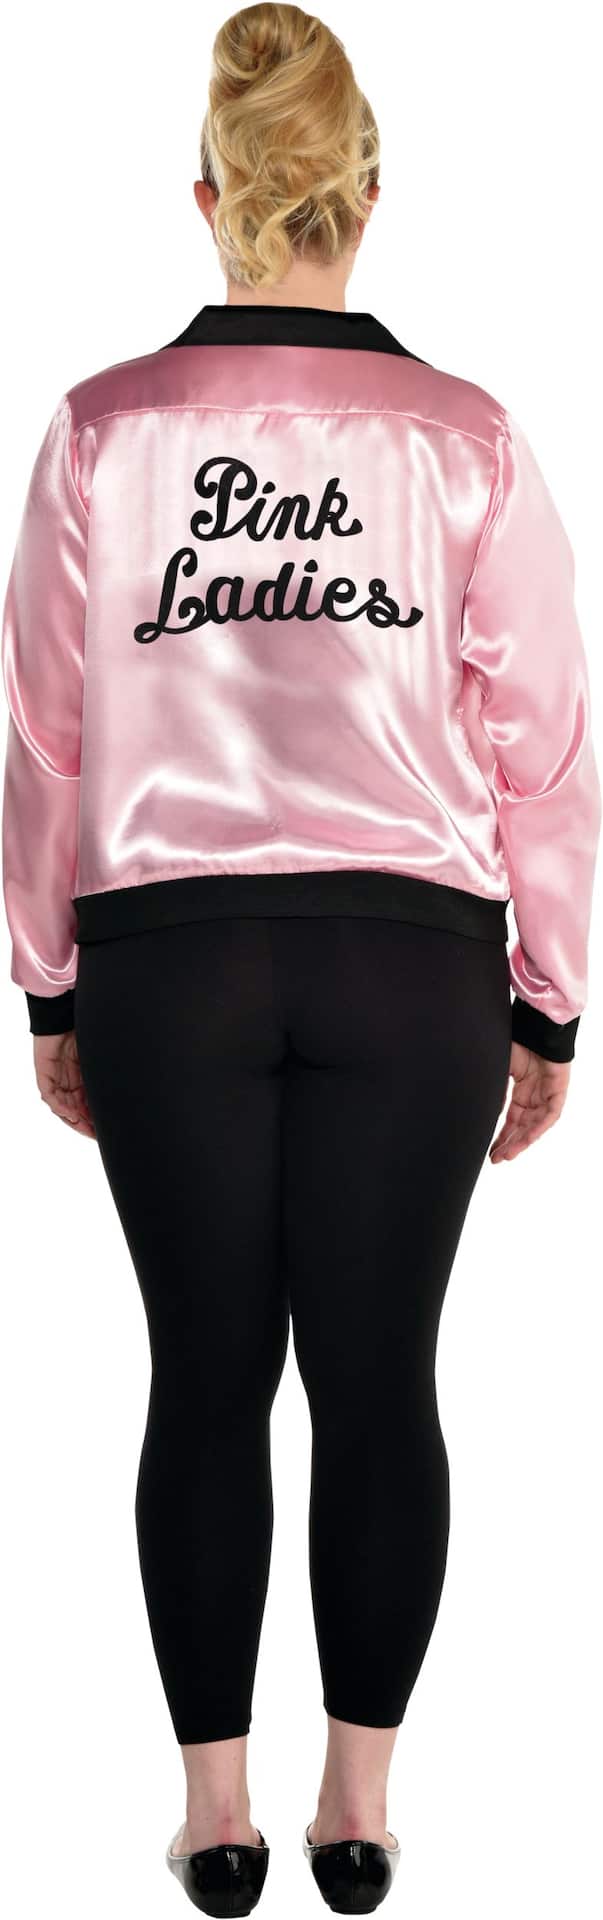 Adult Grease Pink Ladies Jacket, Pink/Black, Plus Size, Wearable Costume  Accessory for Halloween